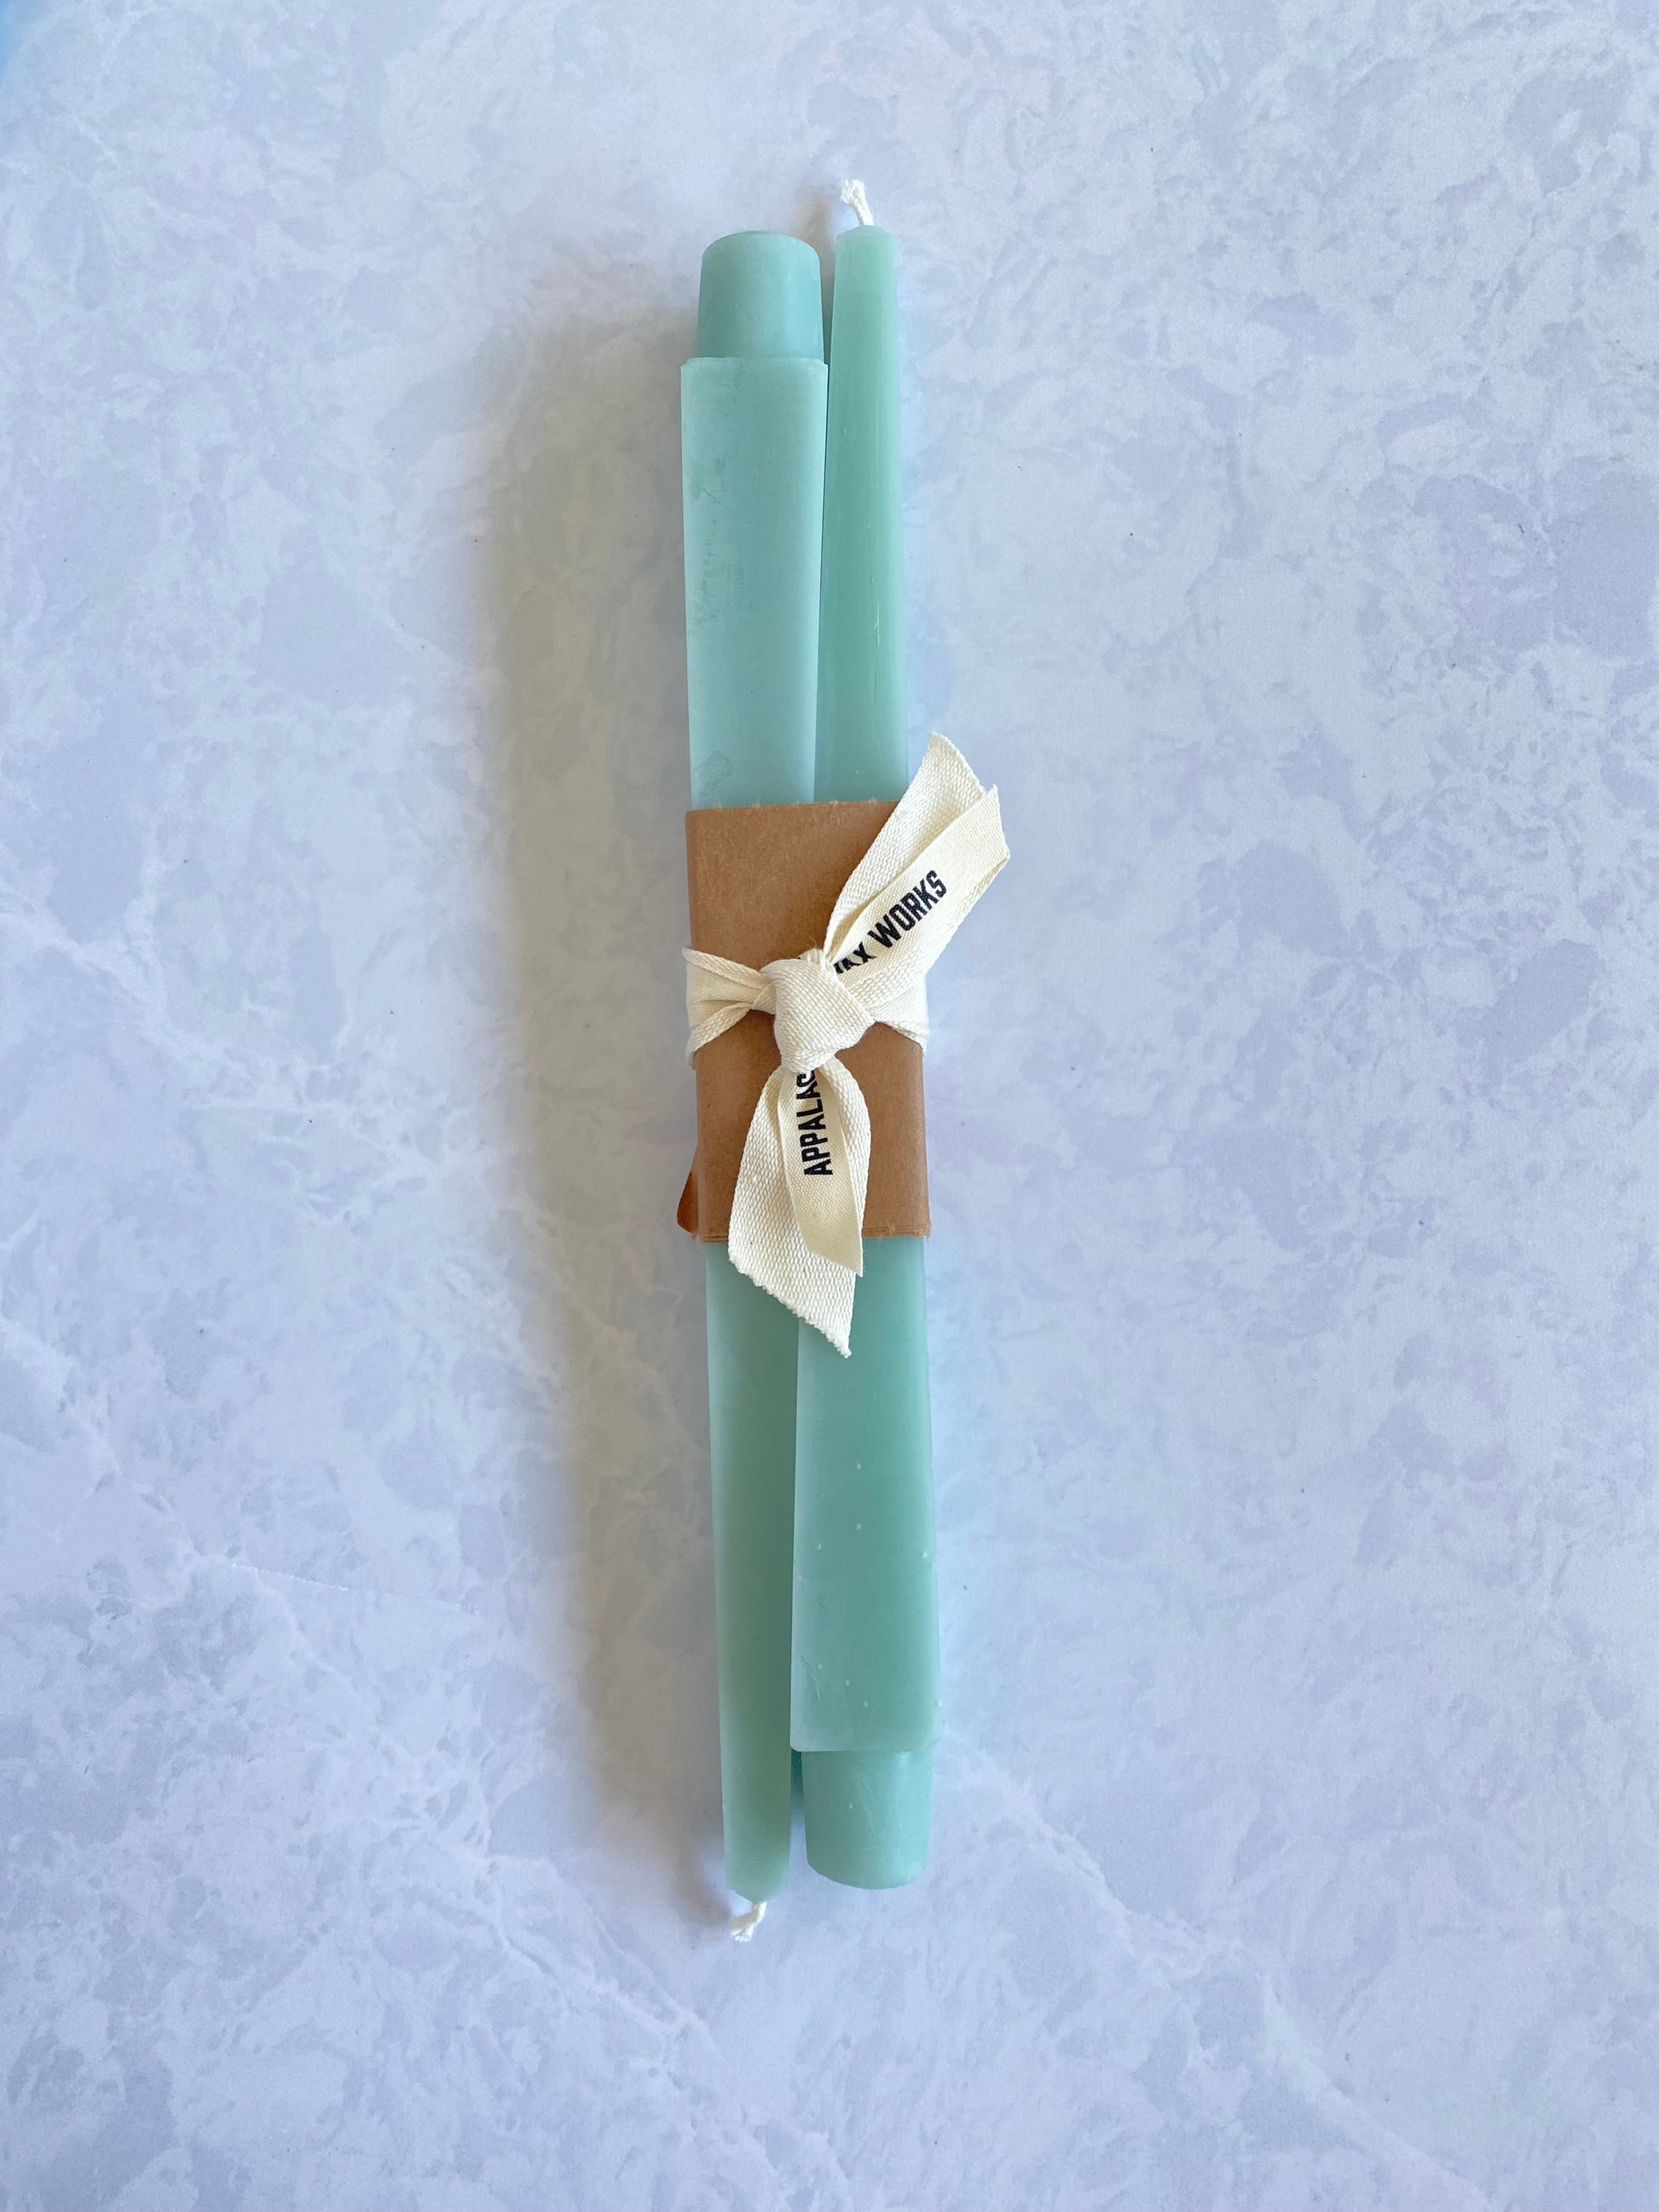 Square Beeswax Taper Candle Pair in Robins Egg Blue Color for Sale